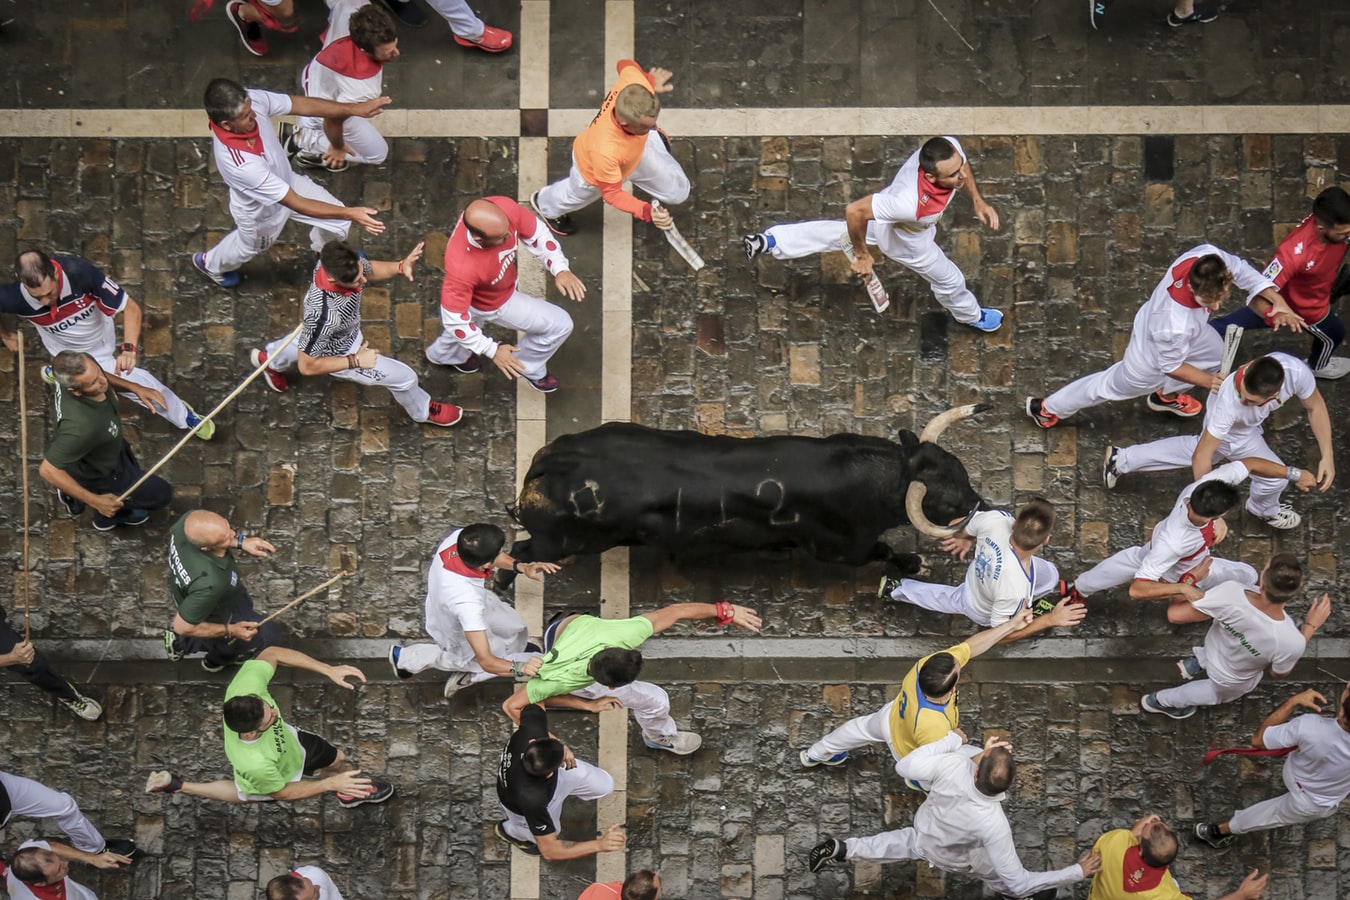 The Running of the Bulls – Tradition or Cruelty? – Week 6